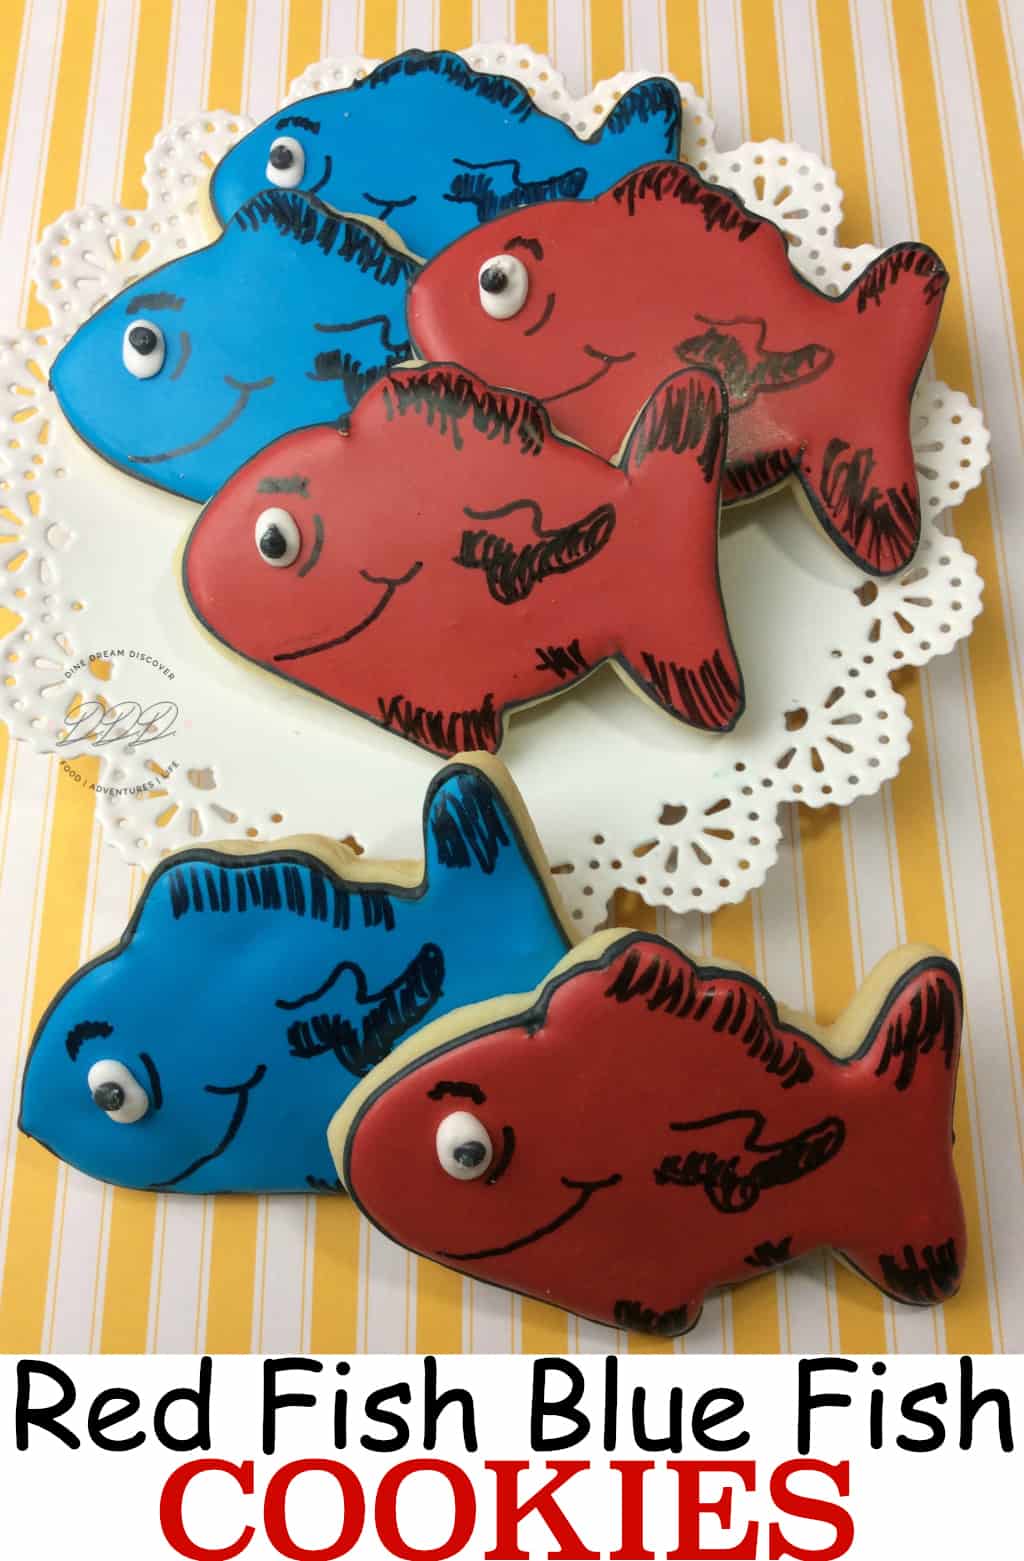 Celebrating Dr. Seuss' birthday with another recipe highlighting one of his books. The One Fish Two Fish Red Fish Blue Fish Cookie recipe is a fun recipe that kids will love and easy to make. 